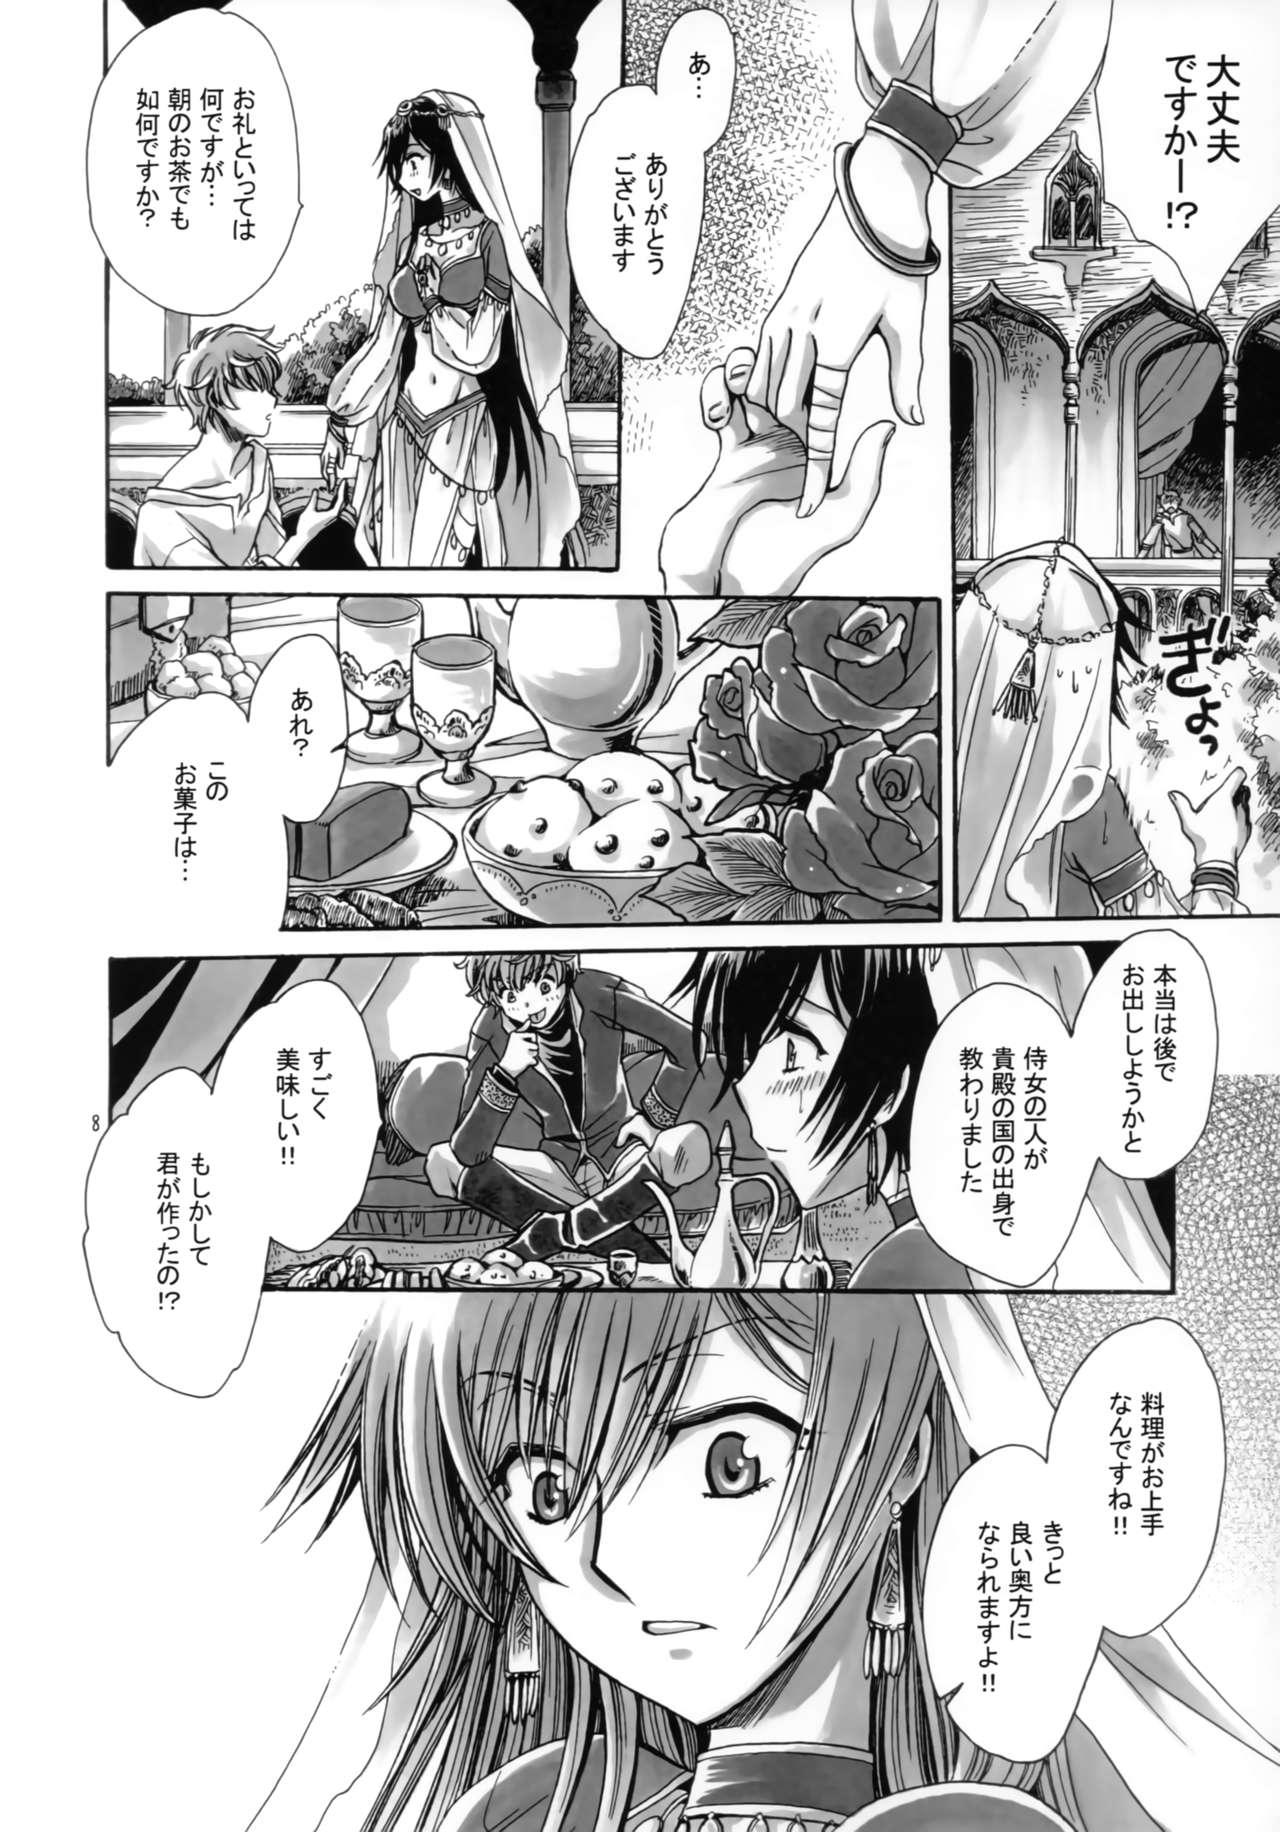 Gay Bus a lot of Princesses - Code geass Dance - Page 7